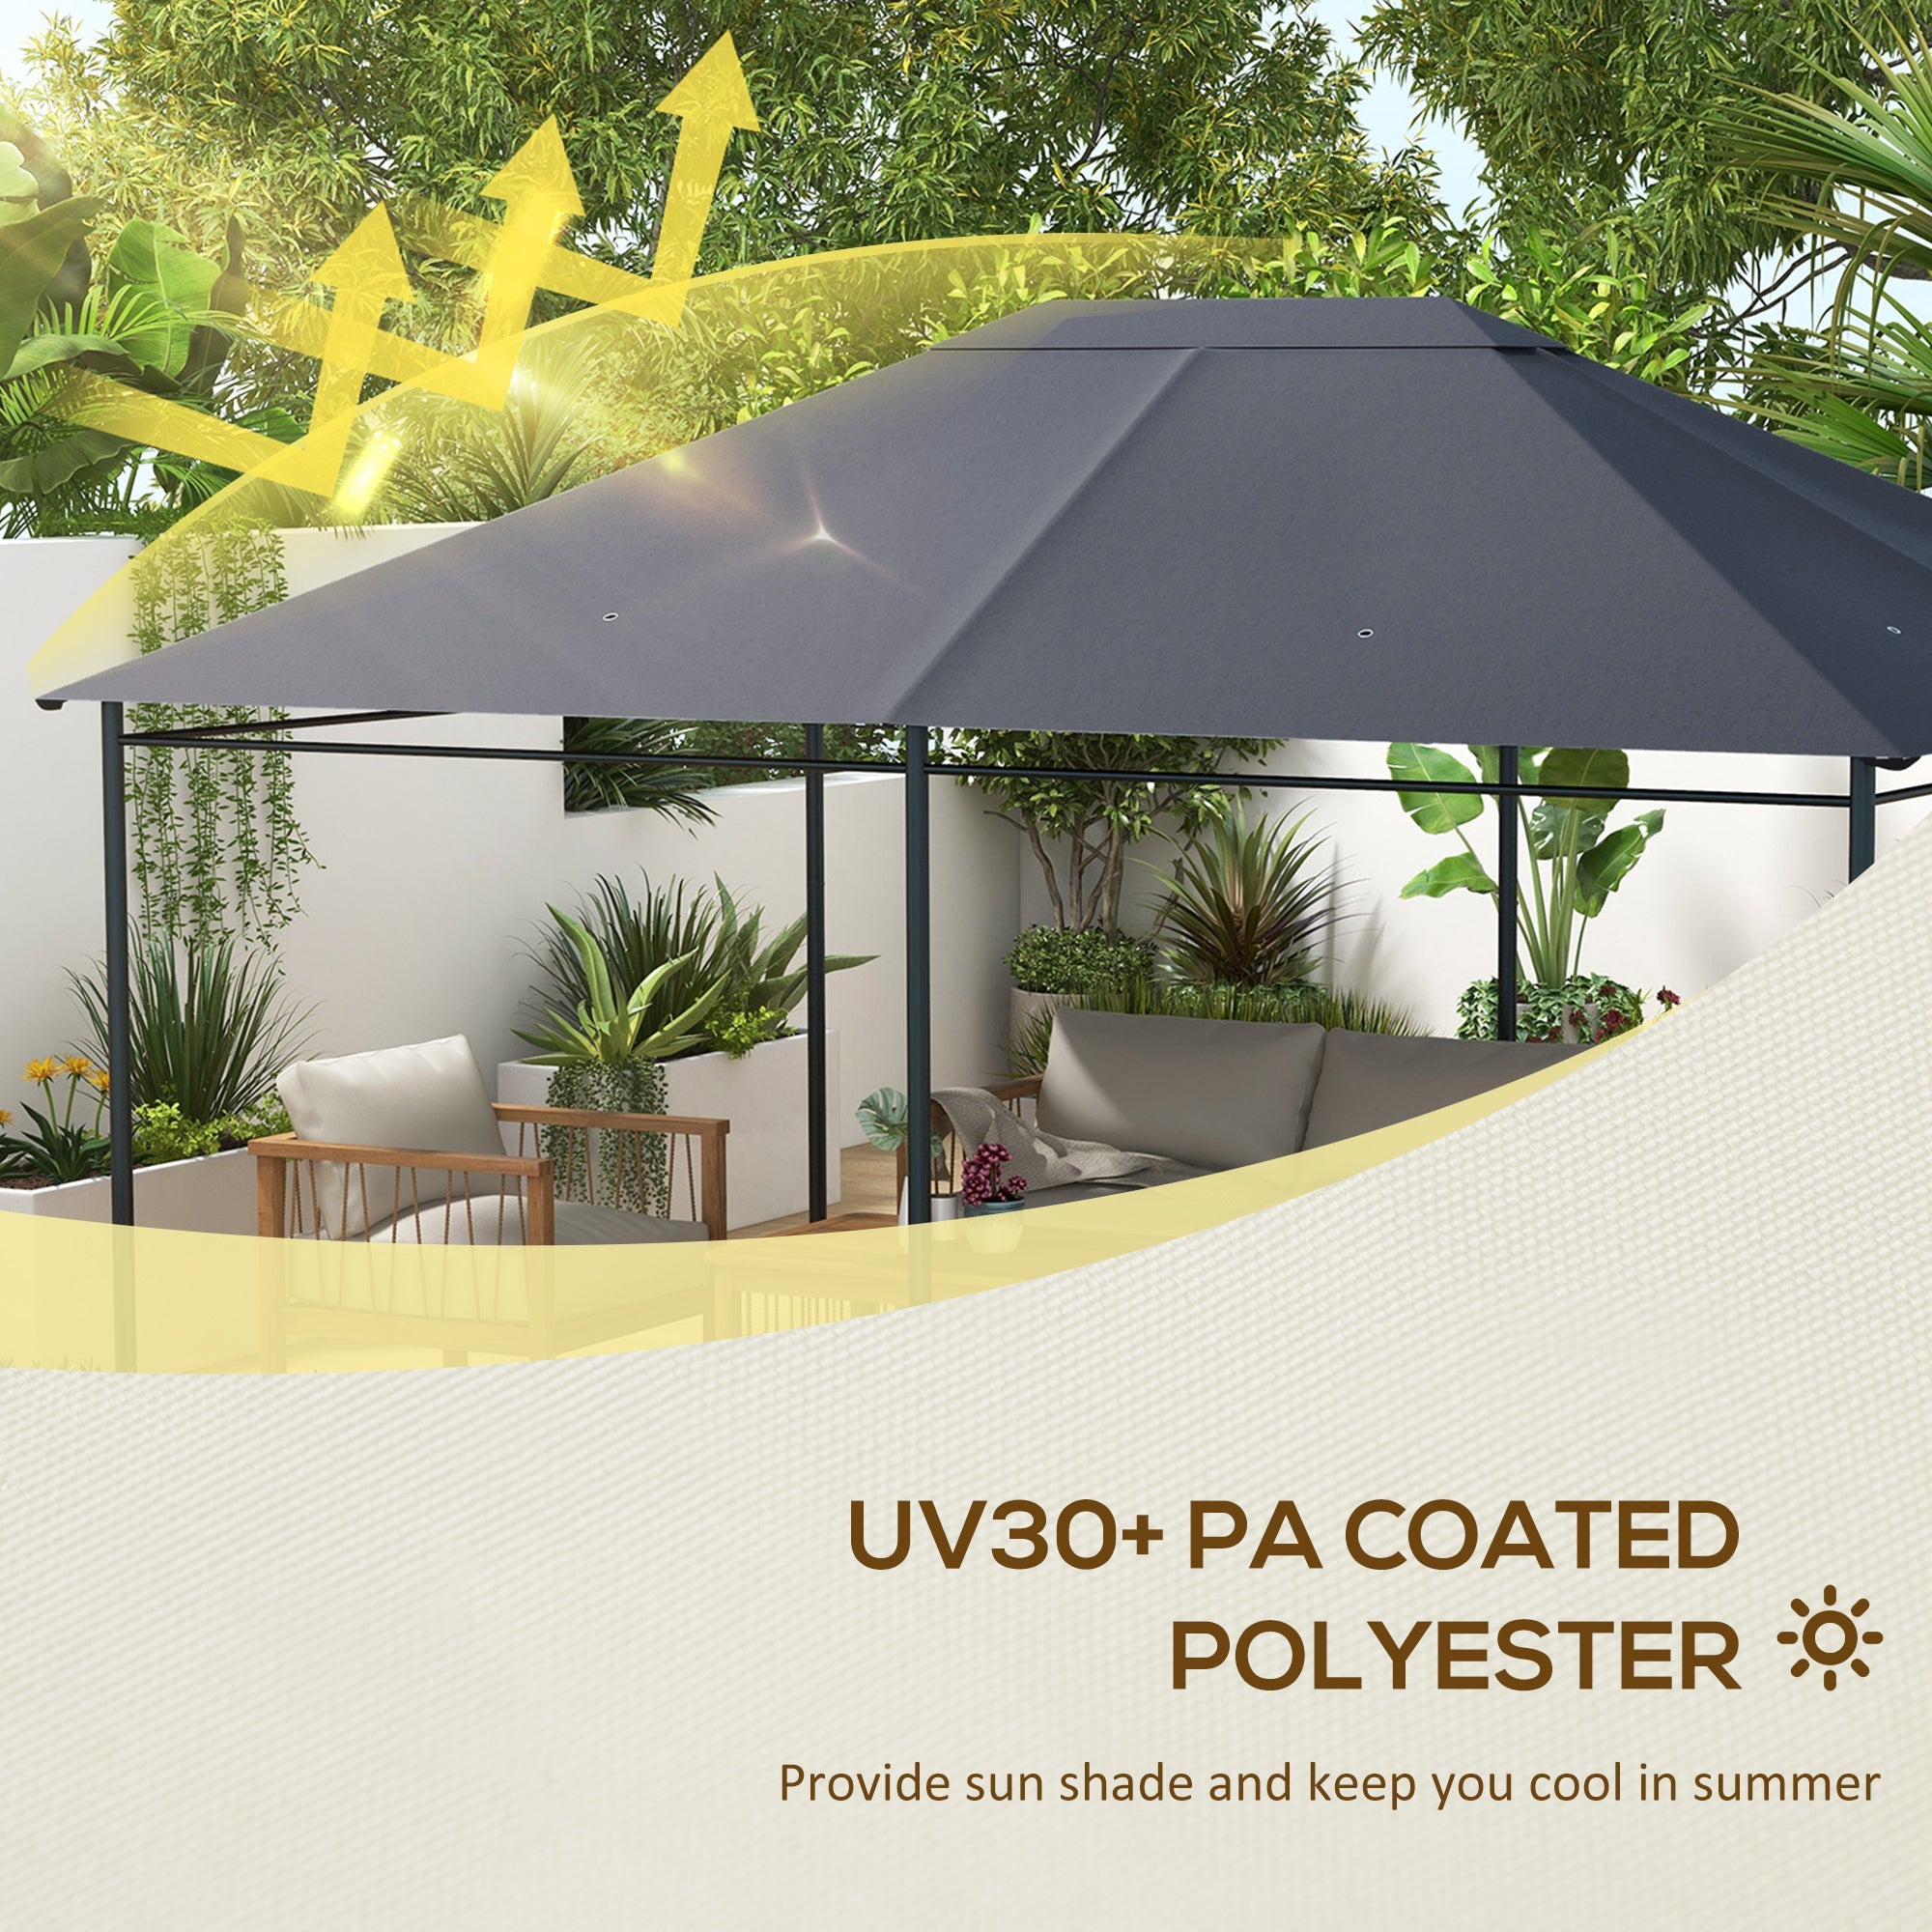 3 x 4m Gazebo Canopy Replacement Cover, Gazebo Roof Replacement (TOP COVER ONLY), Dark Grey-3